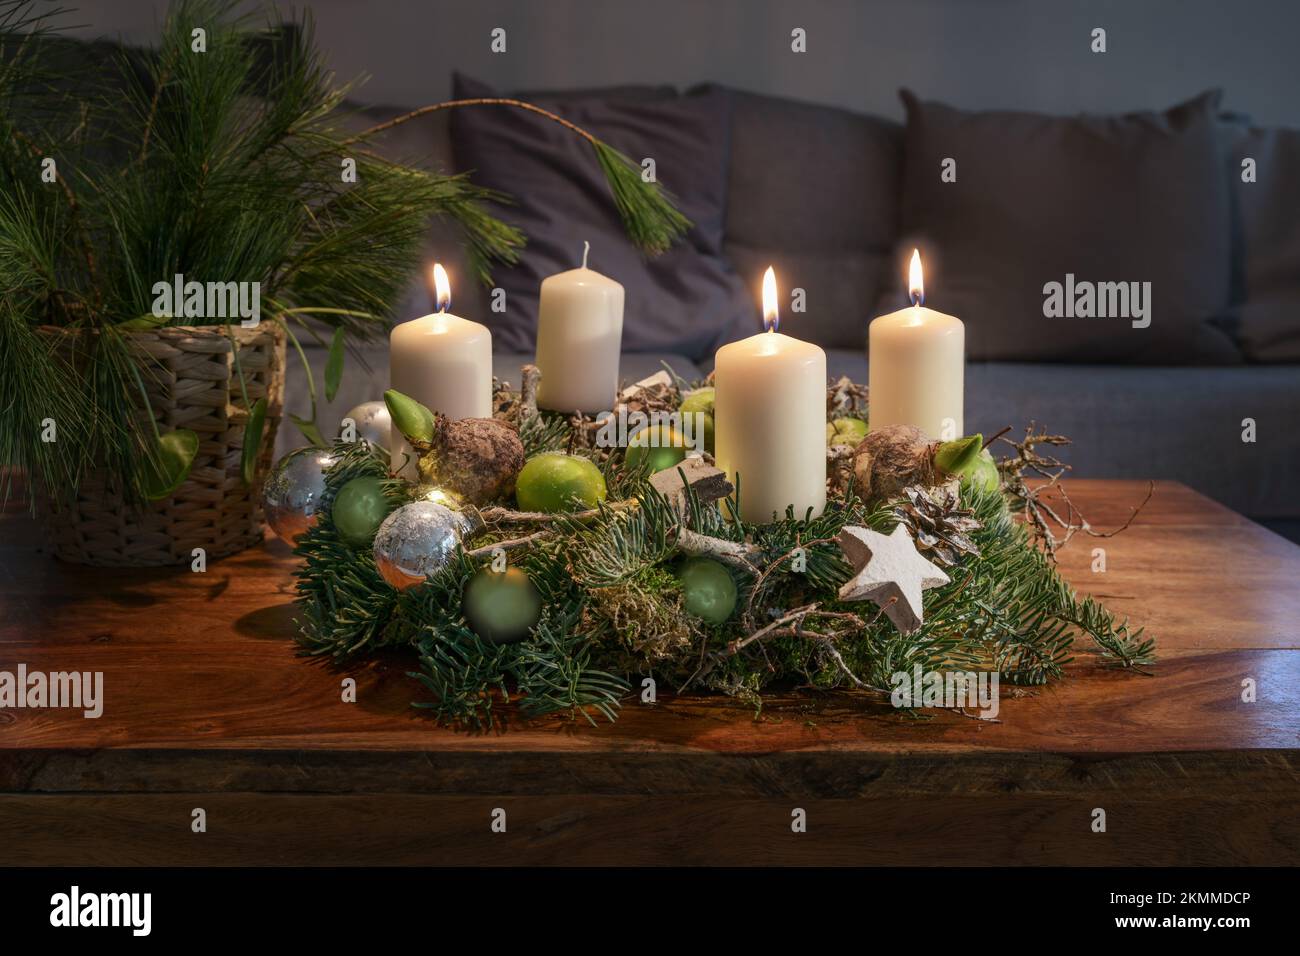 Third Advent, wreath with three burning white candles and Christmas decoration on a wooden table in front of the couch, festive home decor, copy space Stock Photo